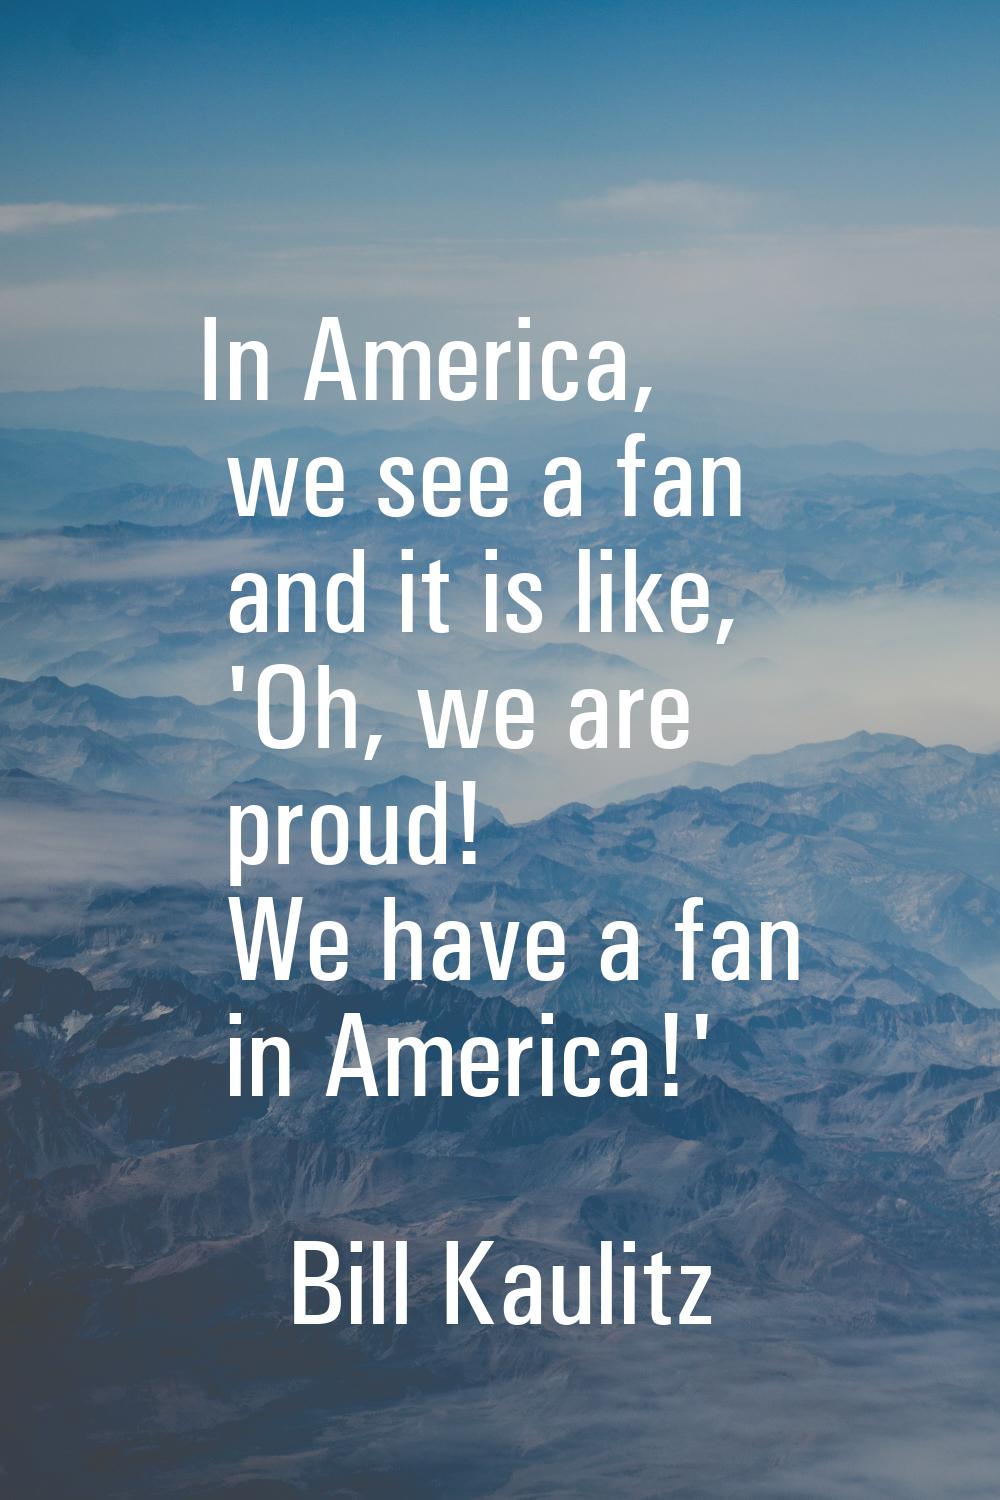 In America, we see a fan and it is like, 'Oh, we are proud! We have a fan in America!'